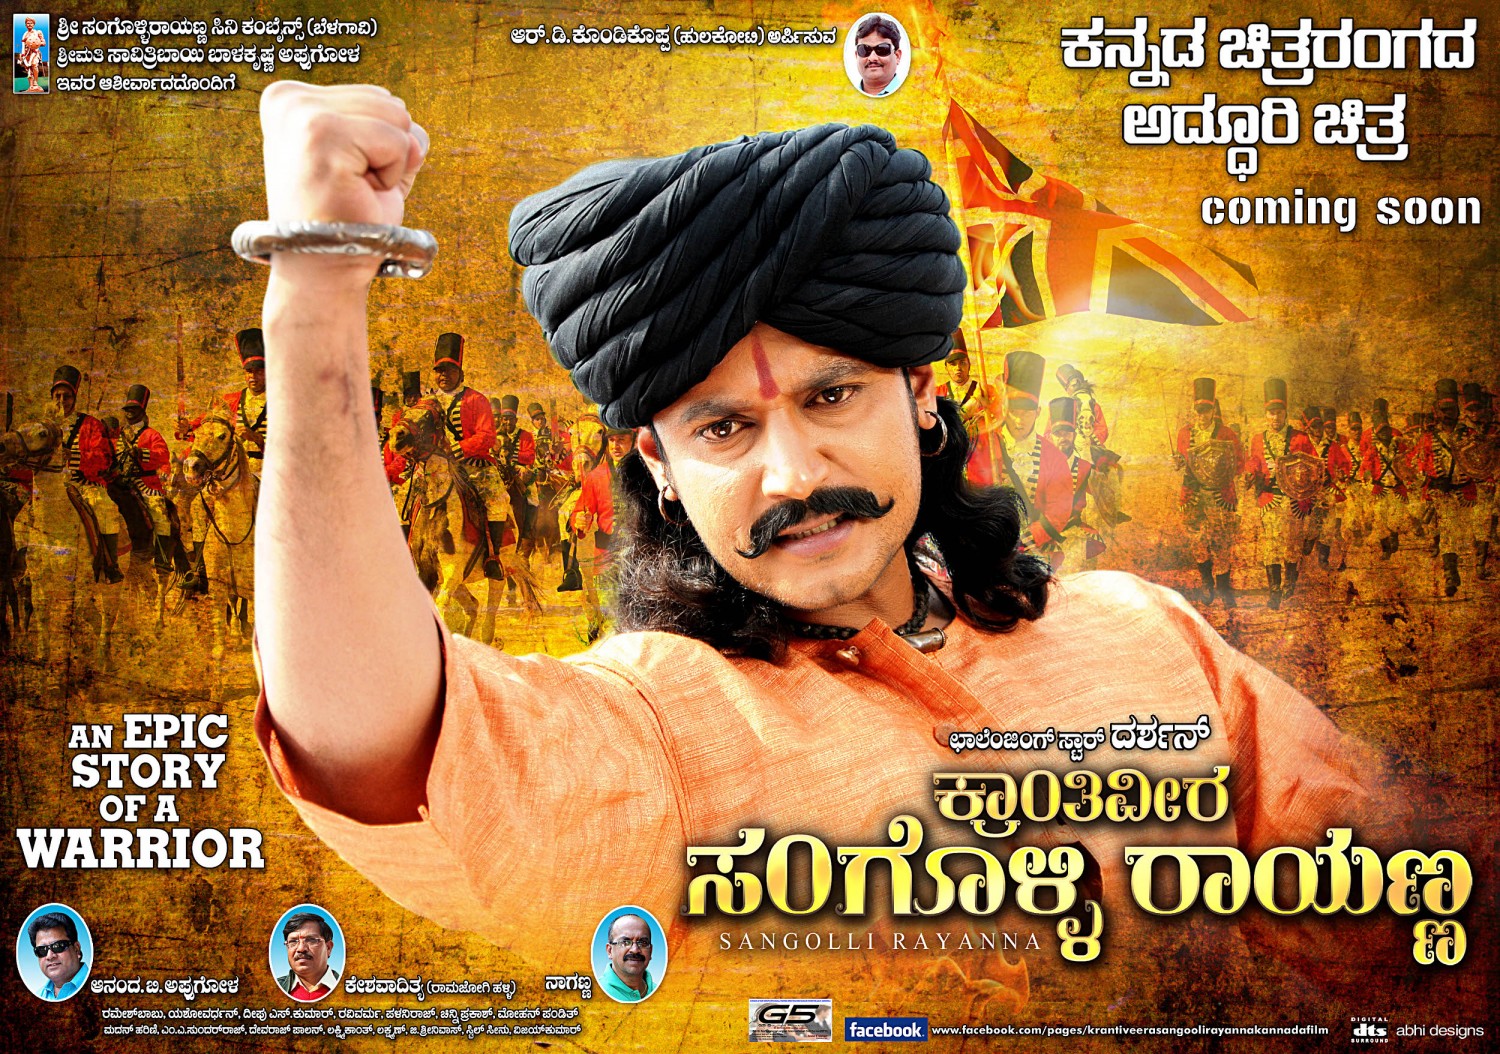 Extra Large Movie Poster Image for Sangolli Rayanna (#33 of 79)